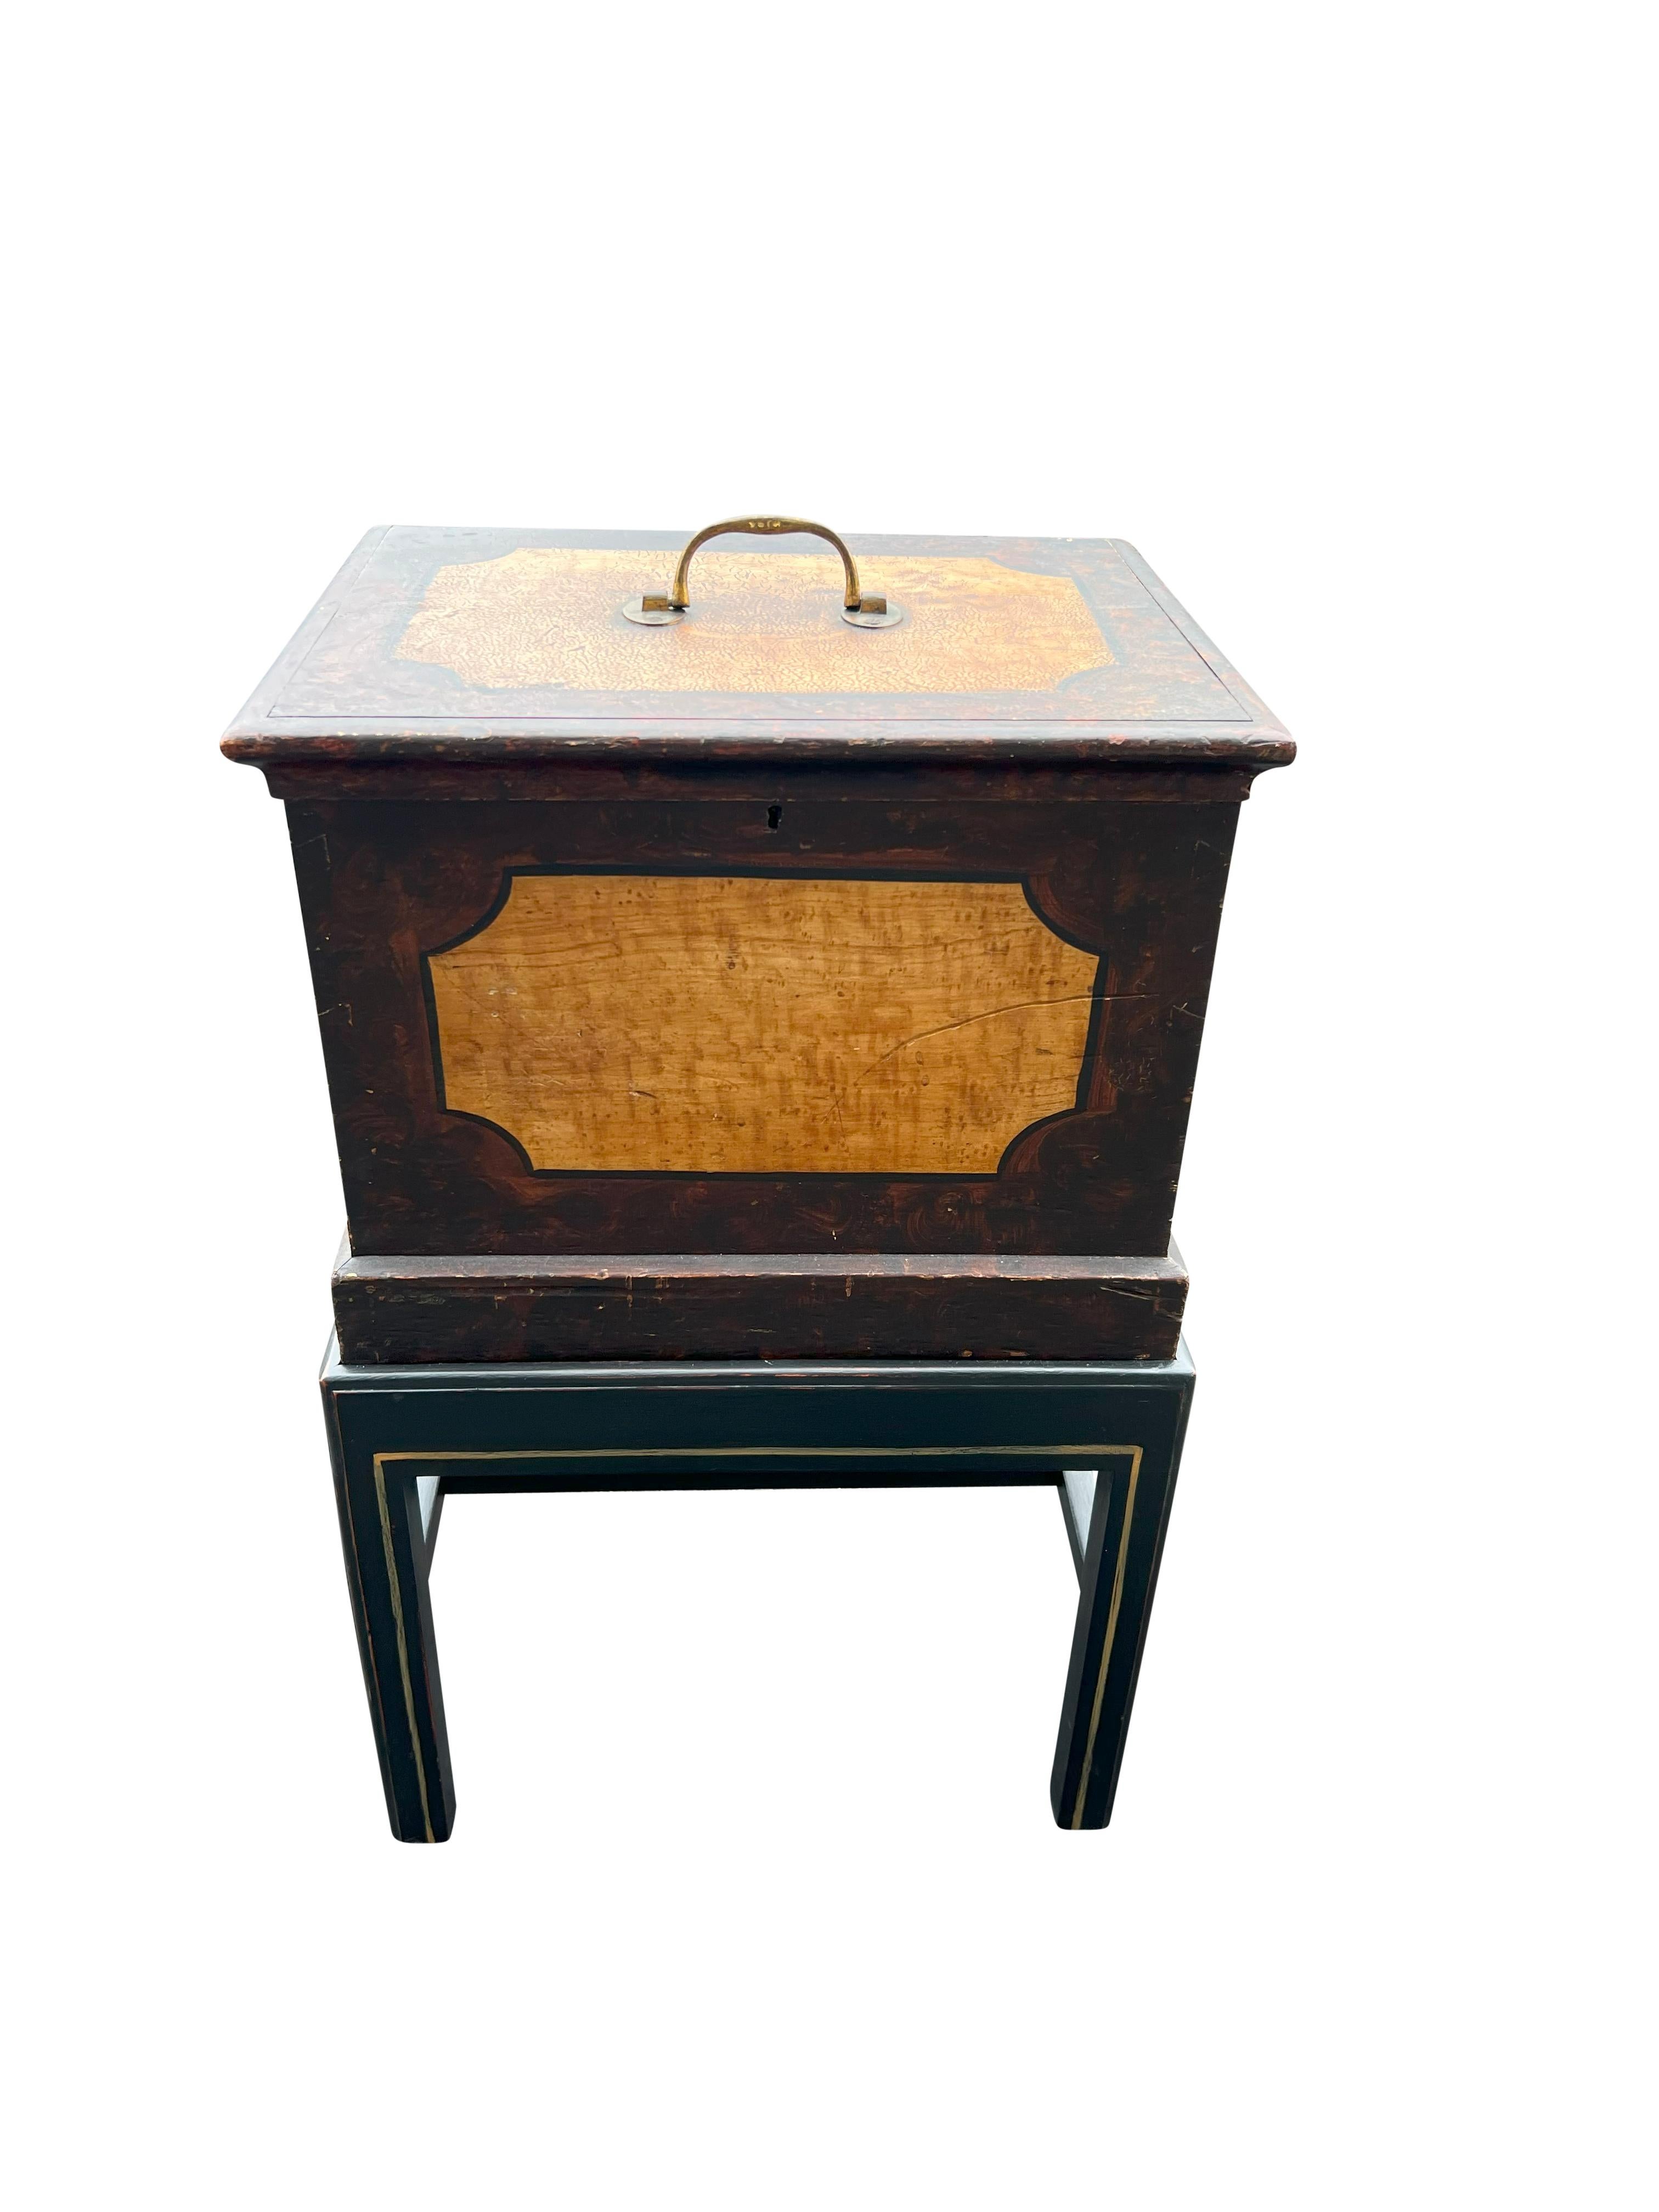 Square form with hinged lid with original brass bail handle. Faux bois decoration. The matt black painted wood base with square section legs and H form stretchers.